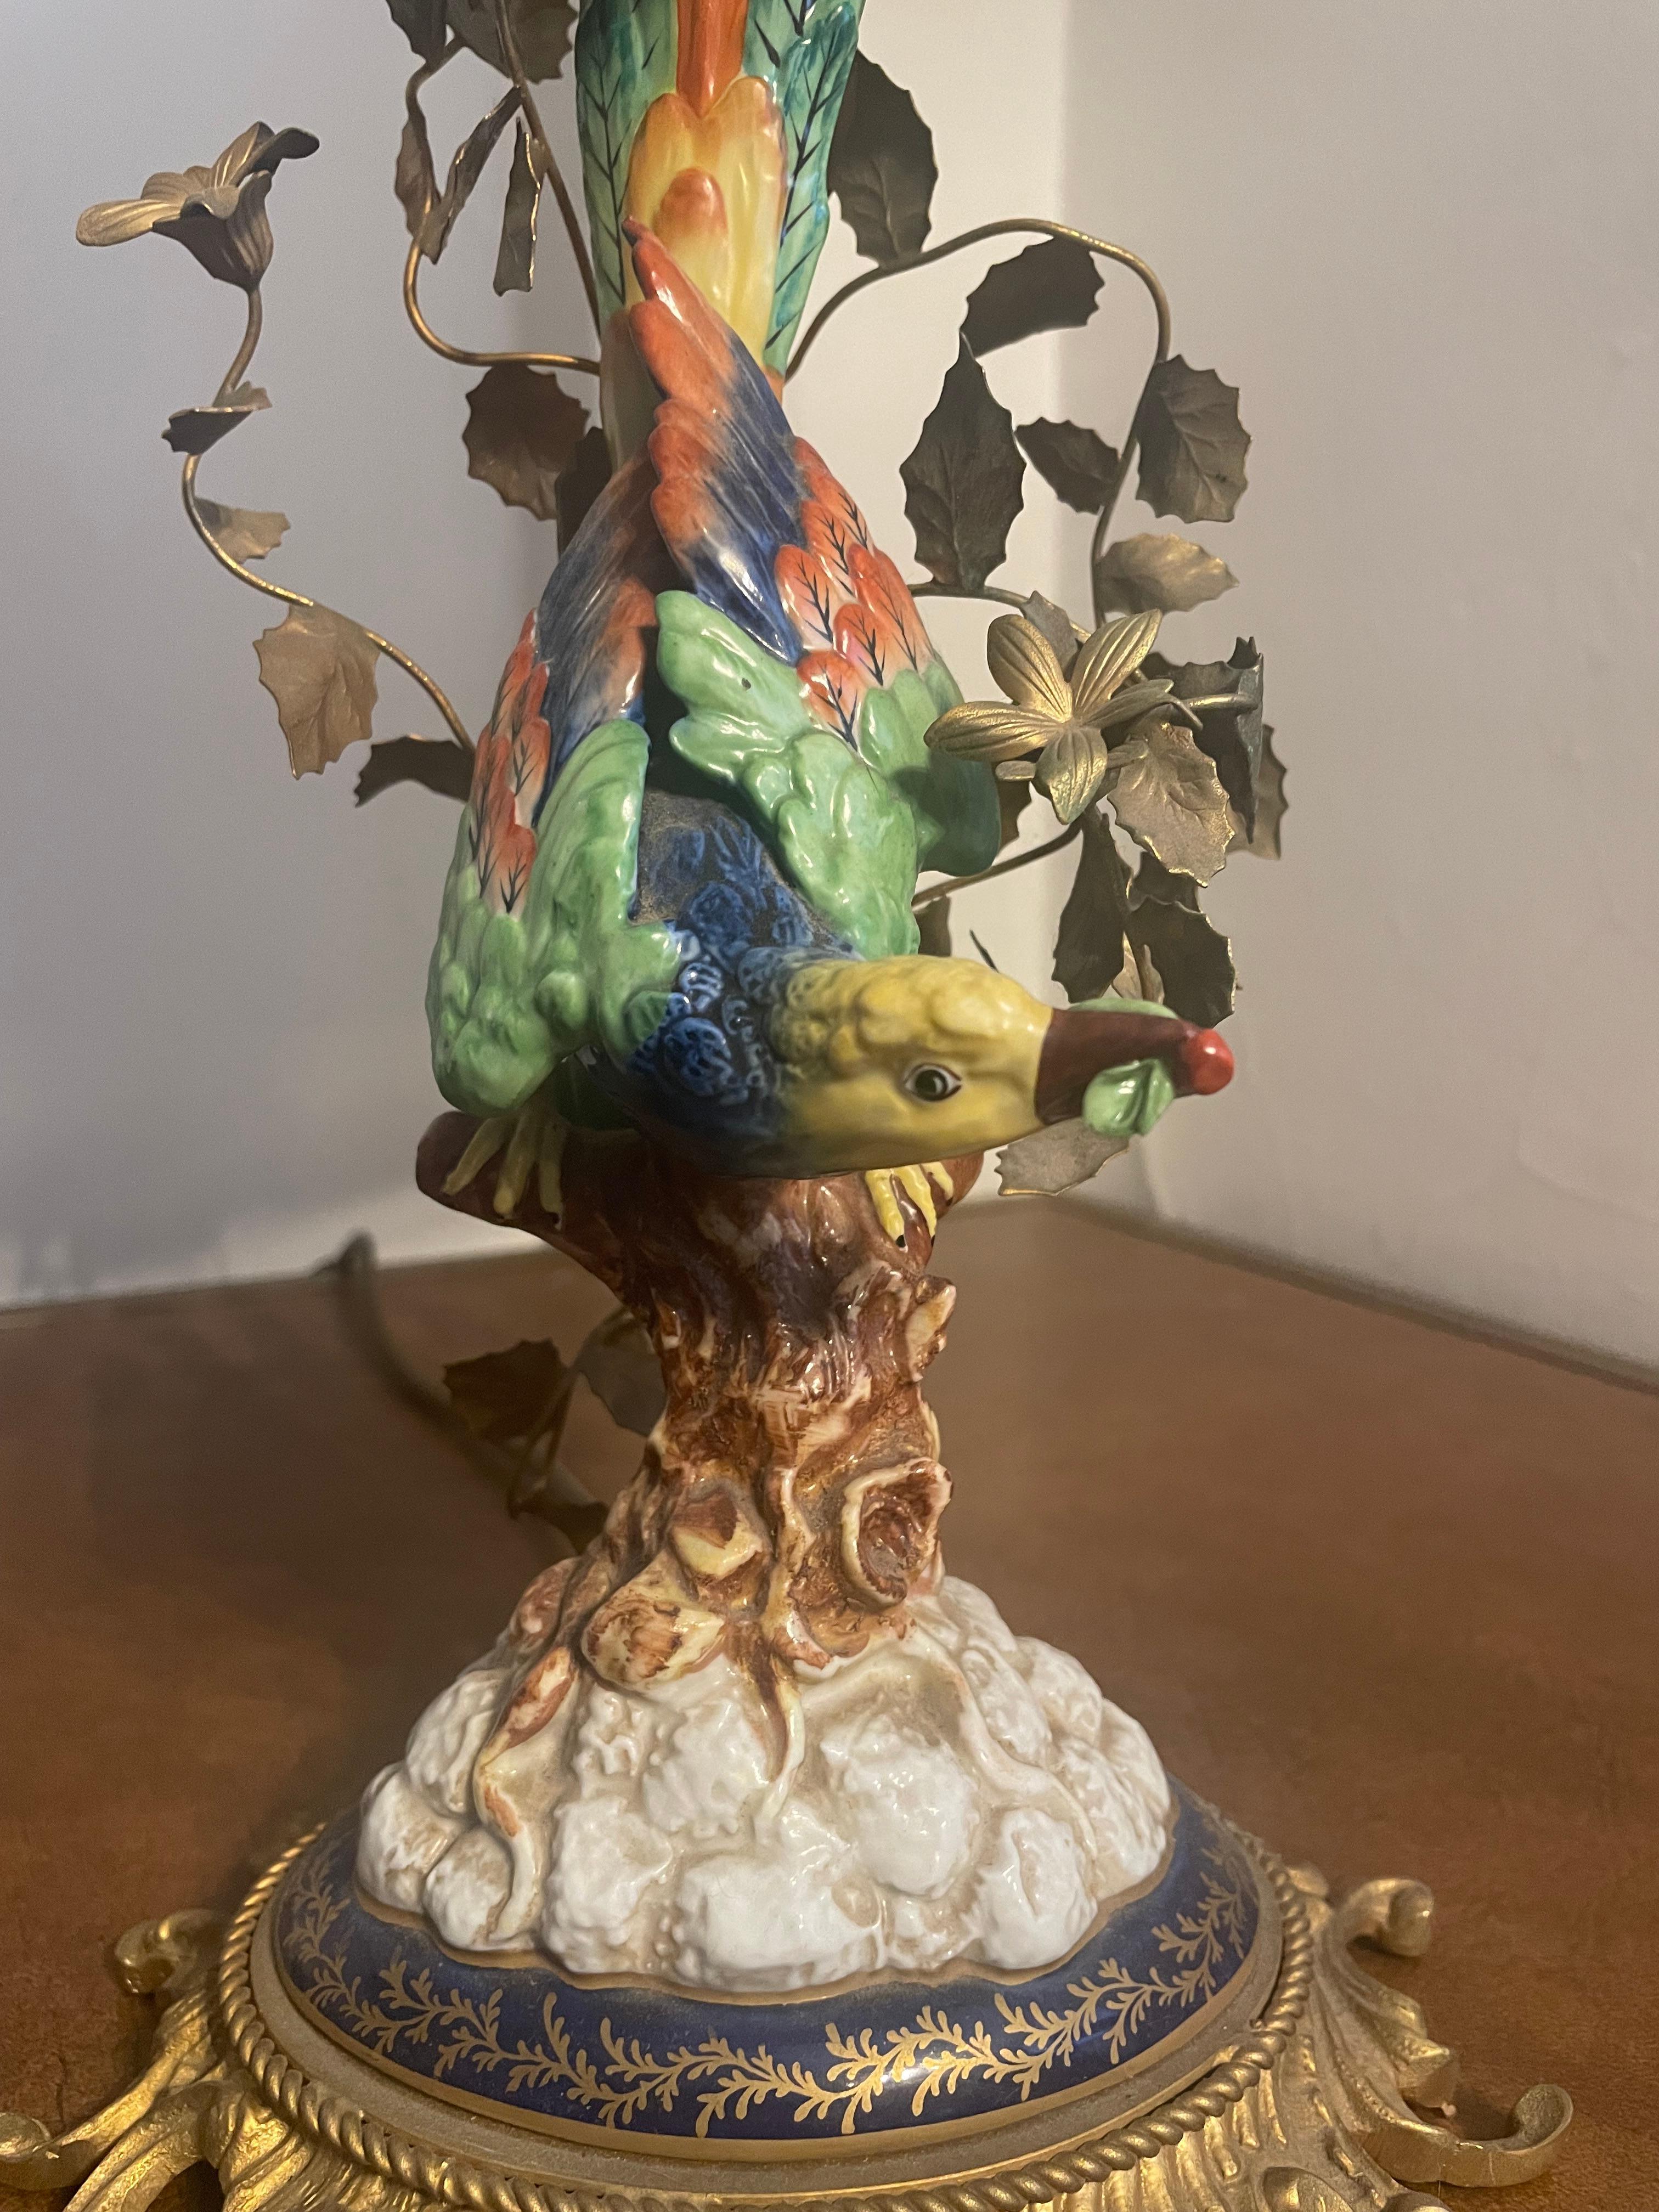 Italian table lamp in porcelain with exotic bird and  flowers mounted on a gilt base, Sèvres style porcelain - With flowers.
1950s
 comes with its original Silk shade.
Two small l SES bulbs needed .
* The shade has a water stain , please see pictures